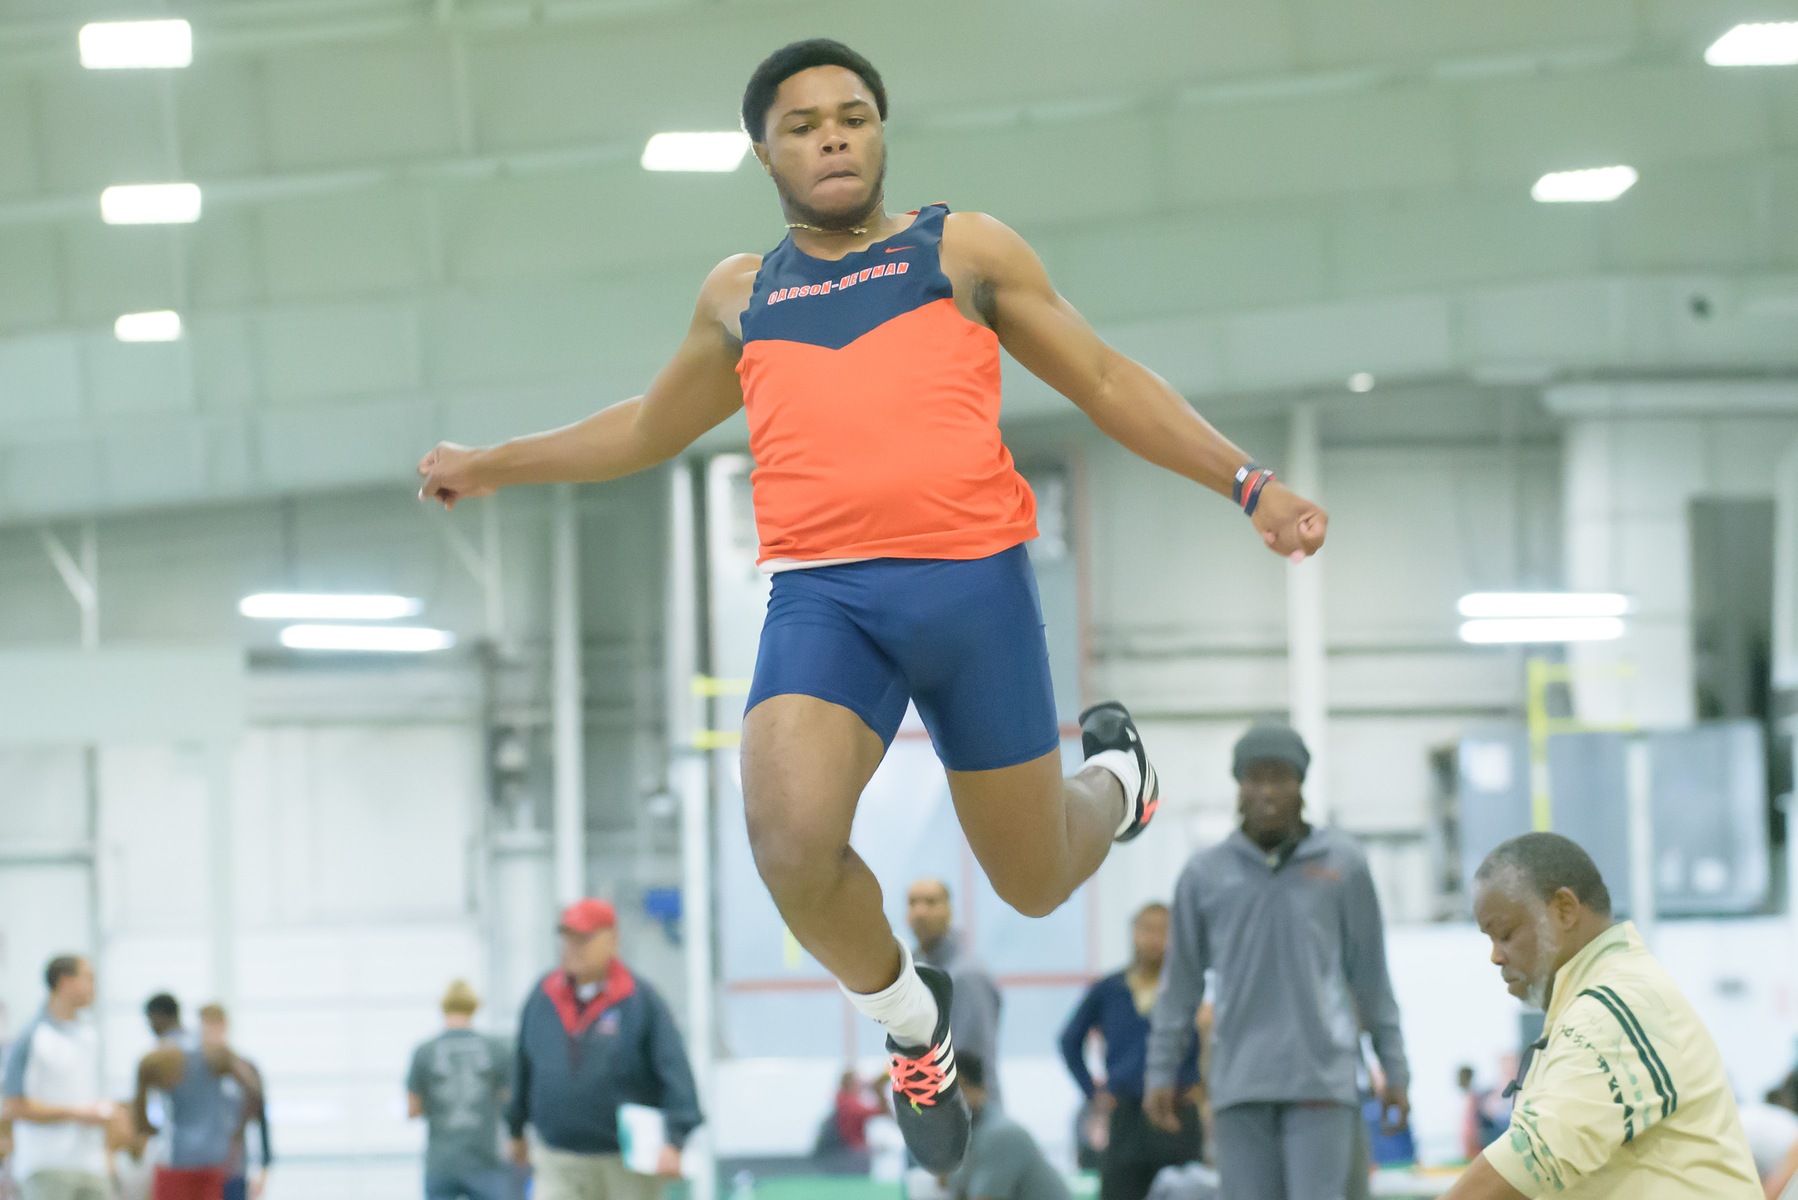 C-N's most important meet to date takes place this weekend